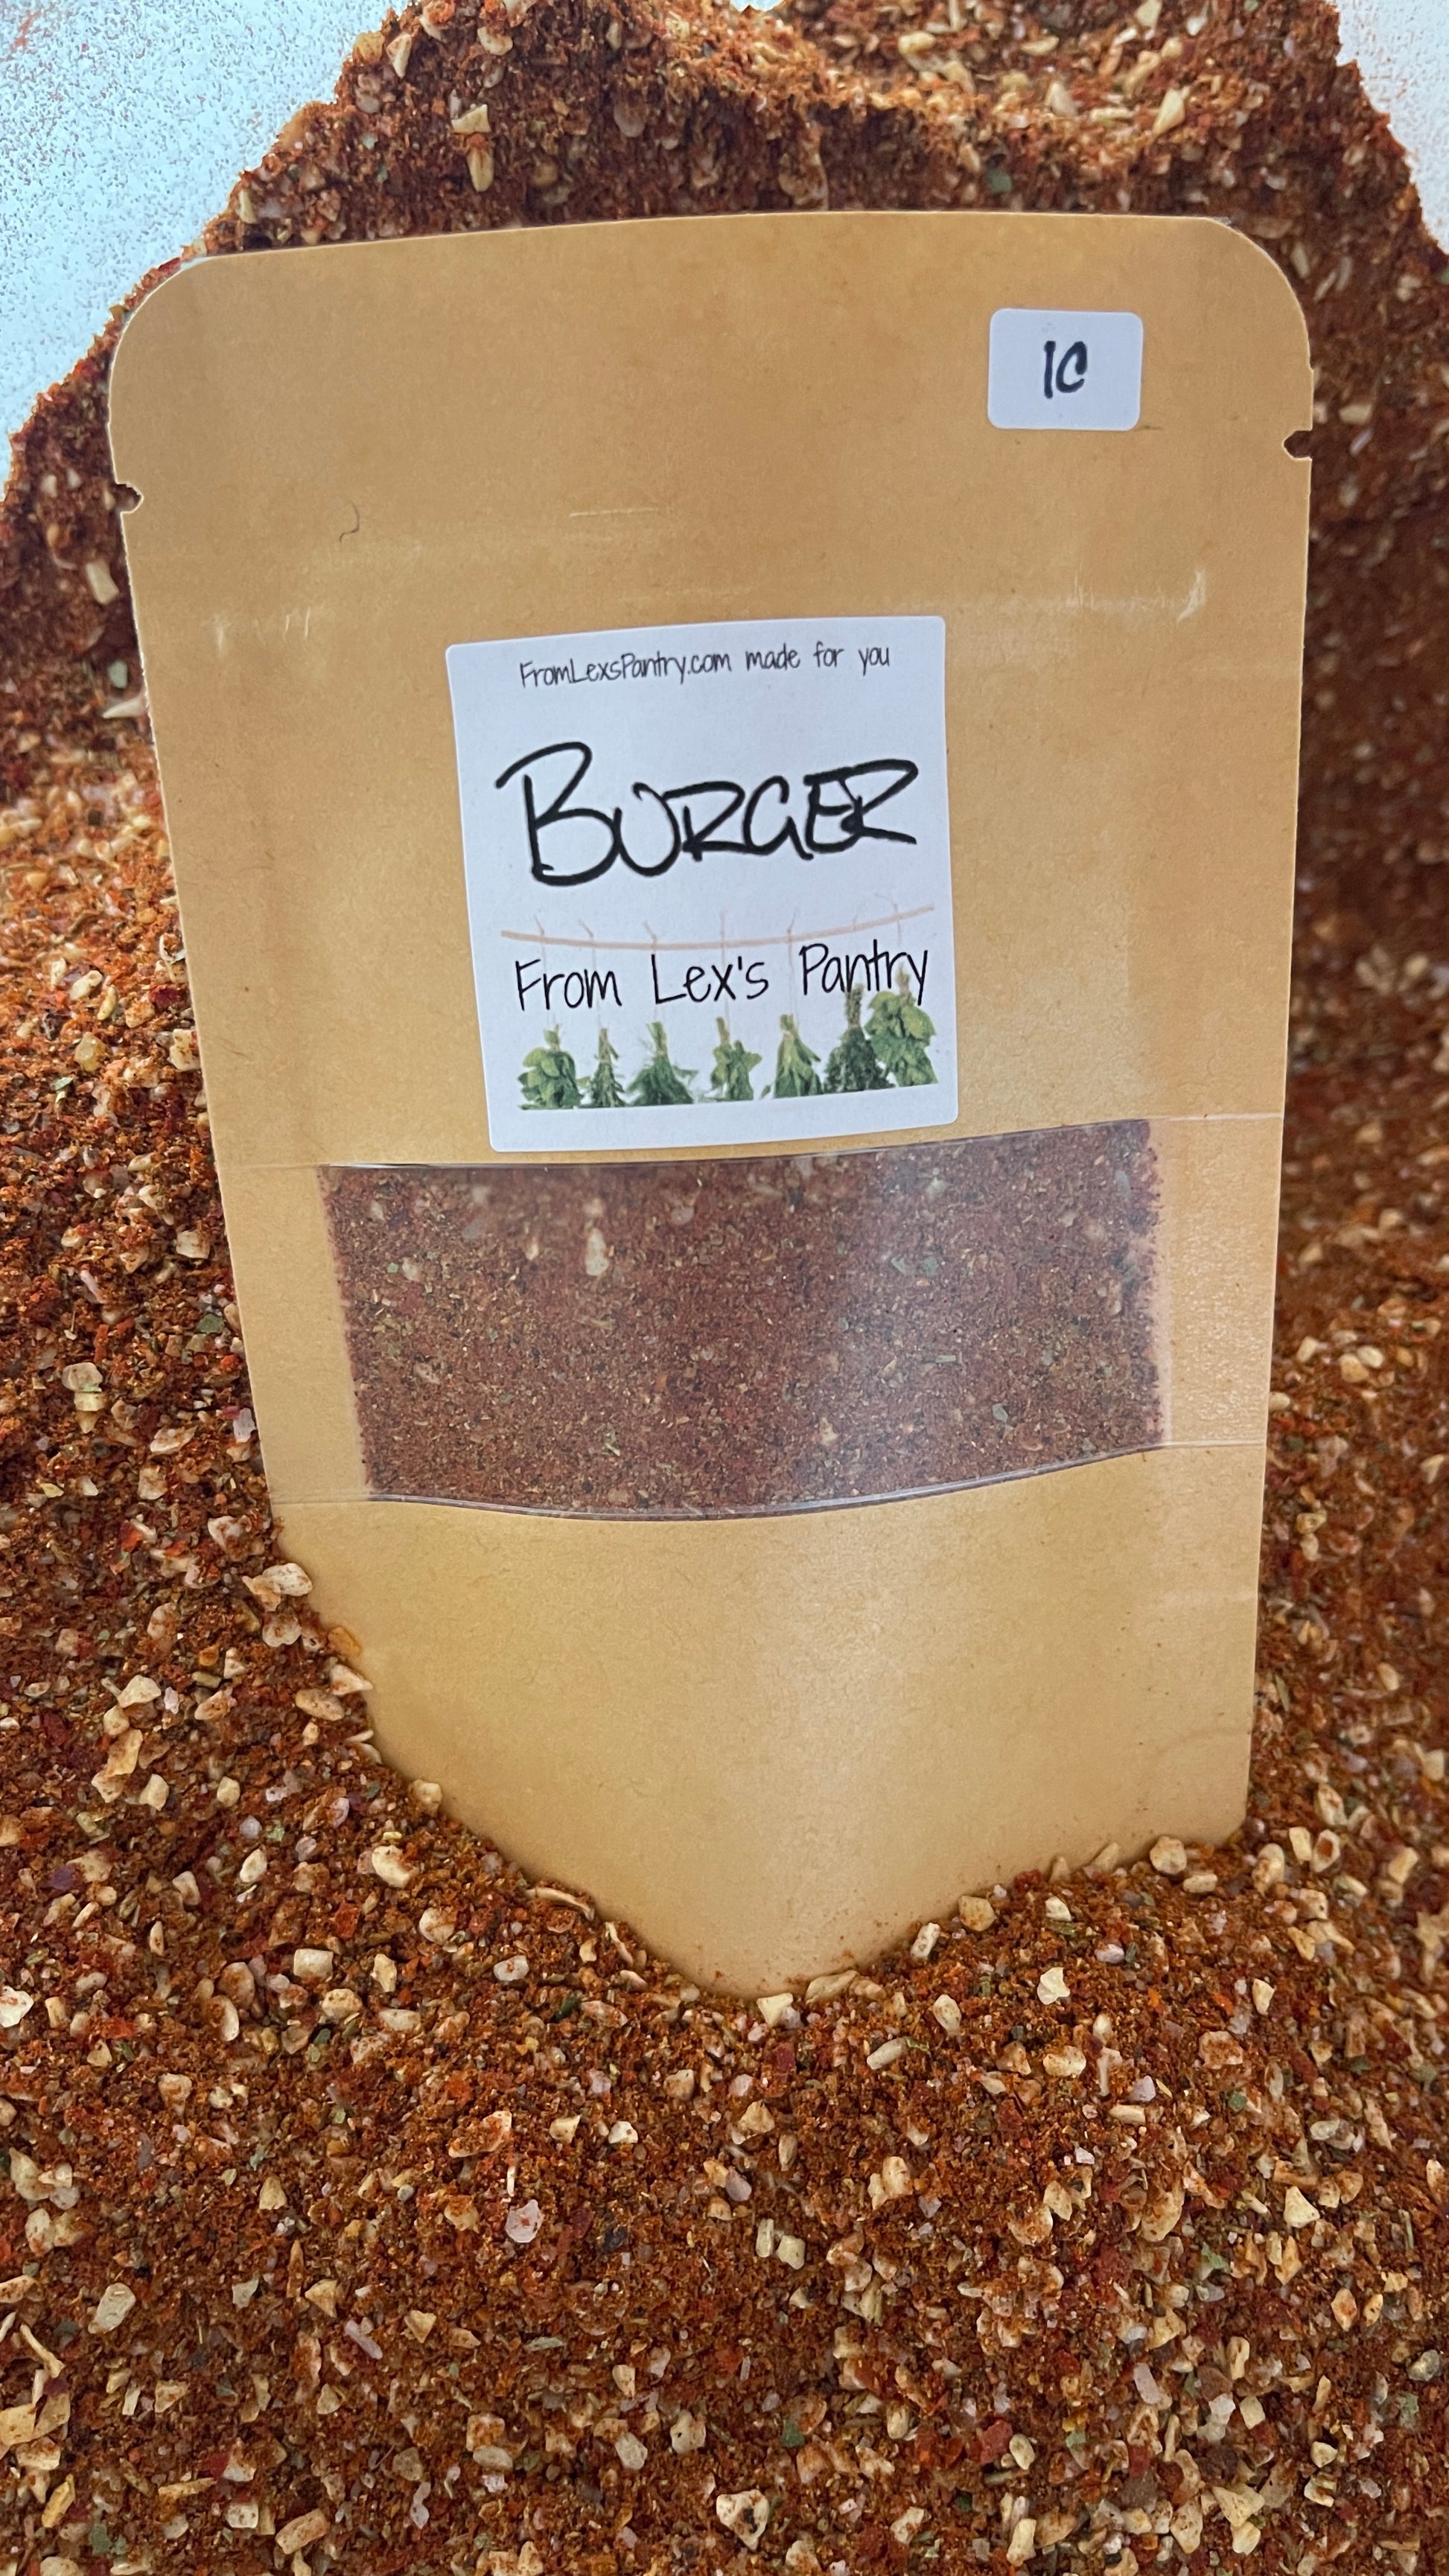 Package of Bay Burger Spice Blend sitting in a pile of the Bay Burger spice blend